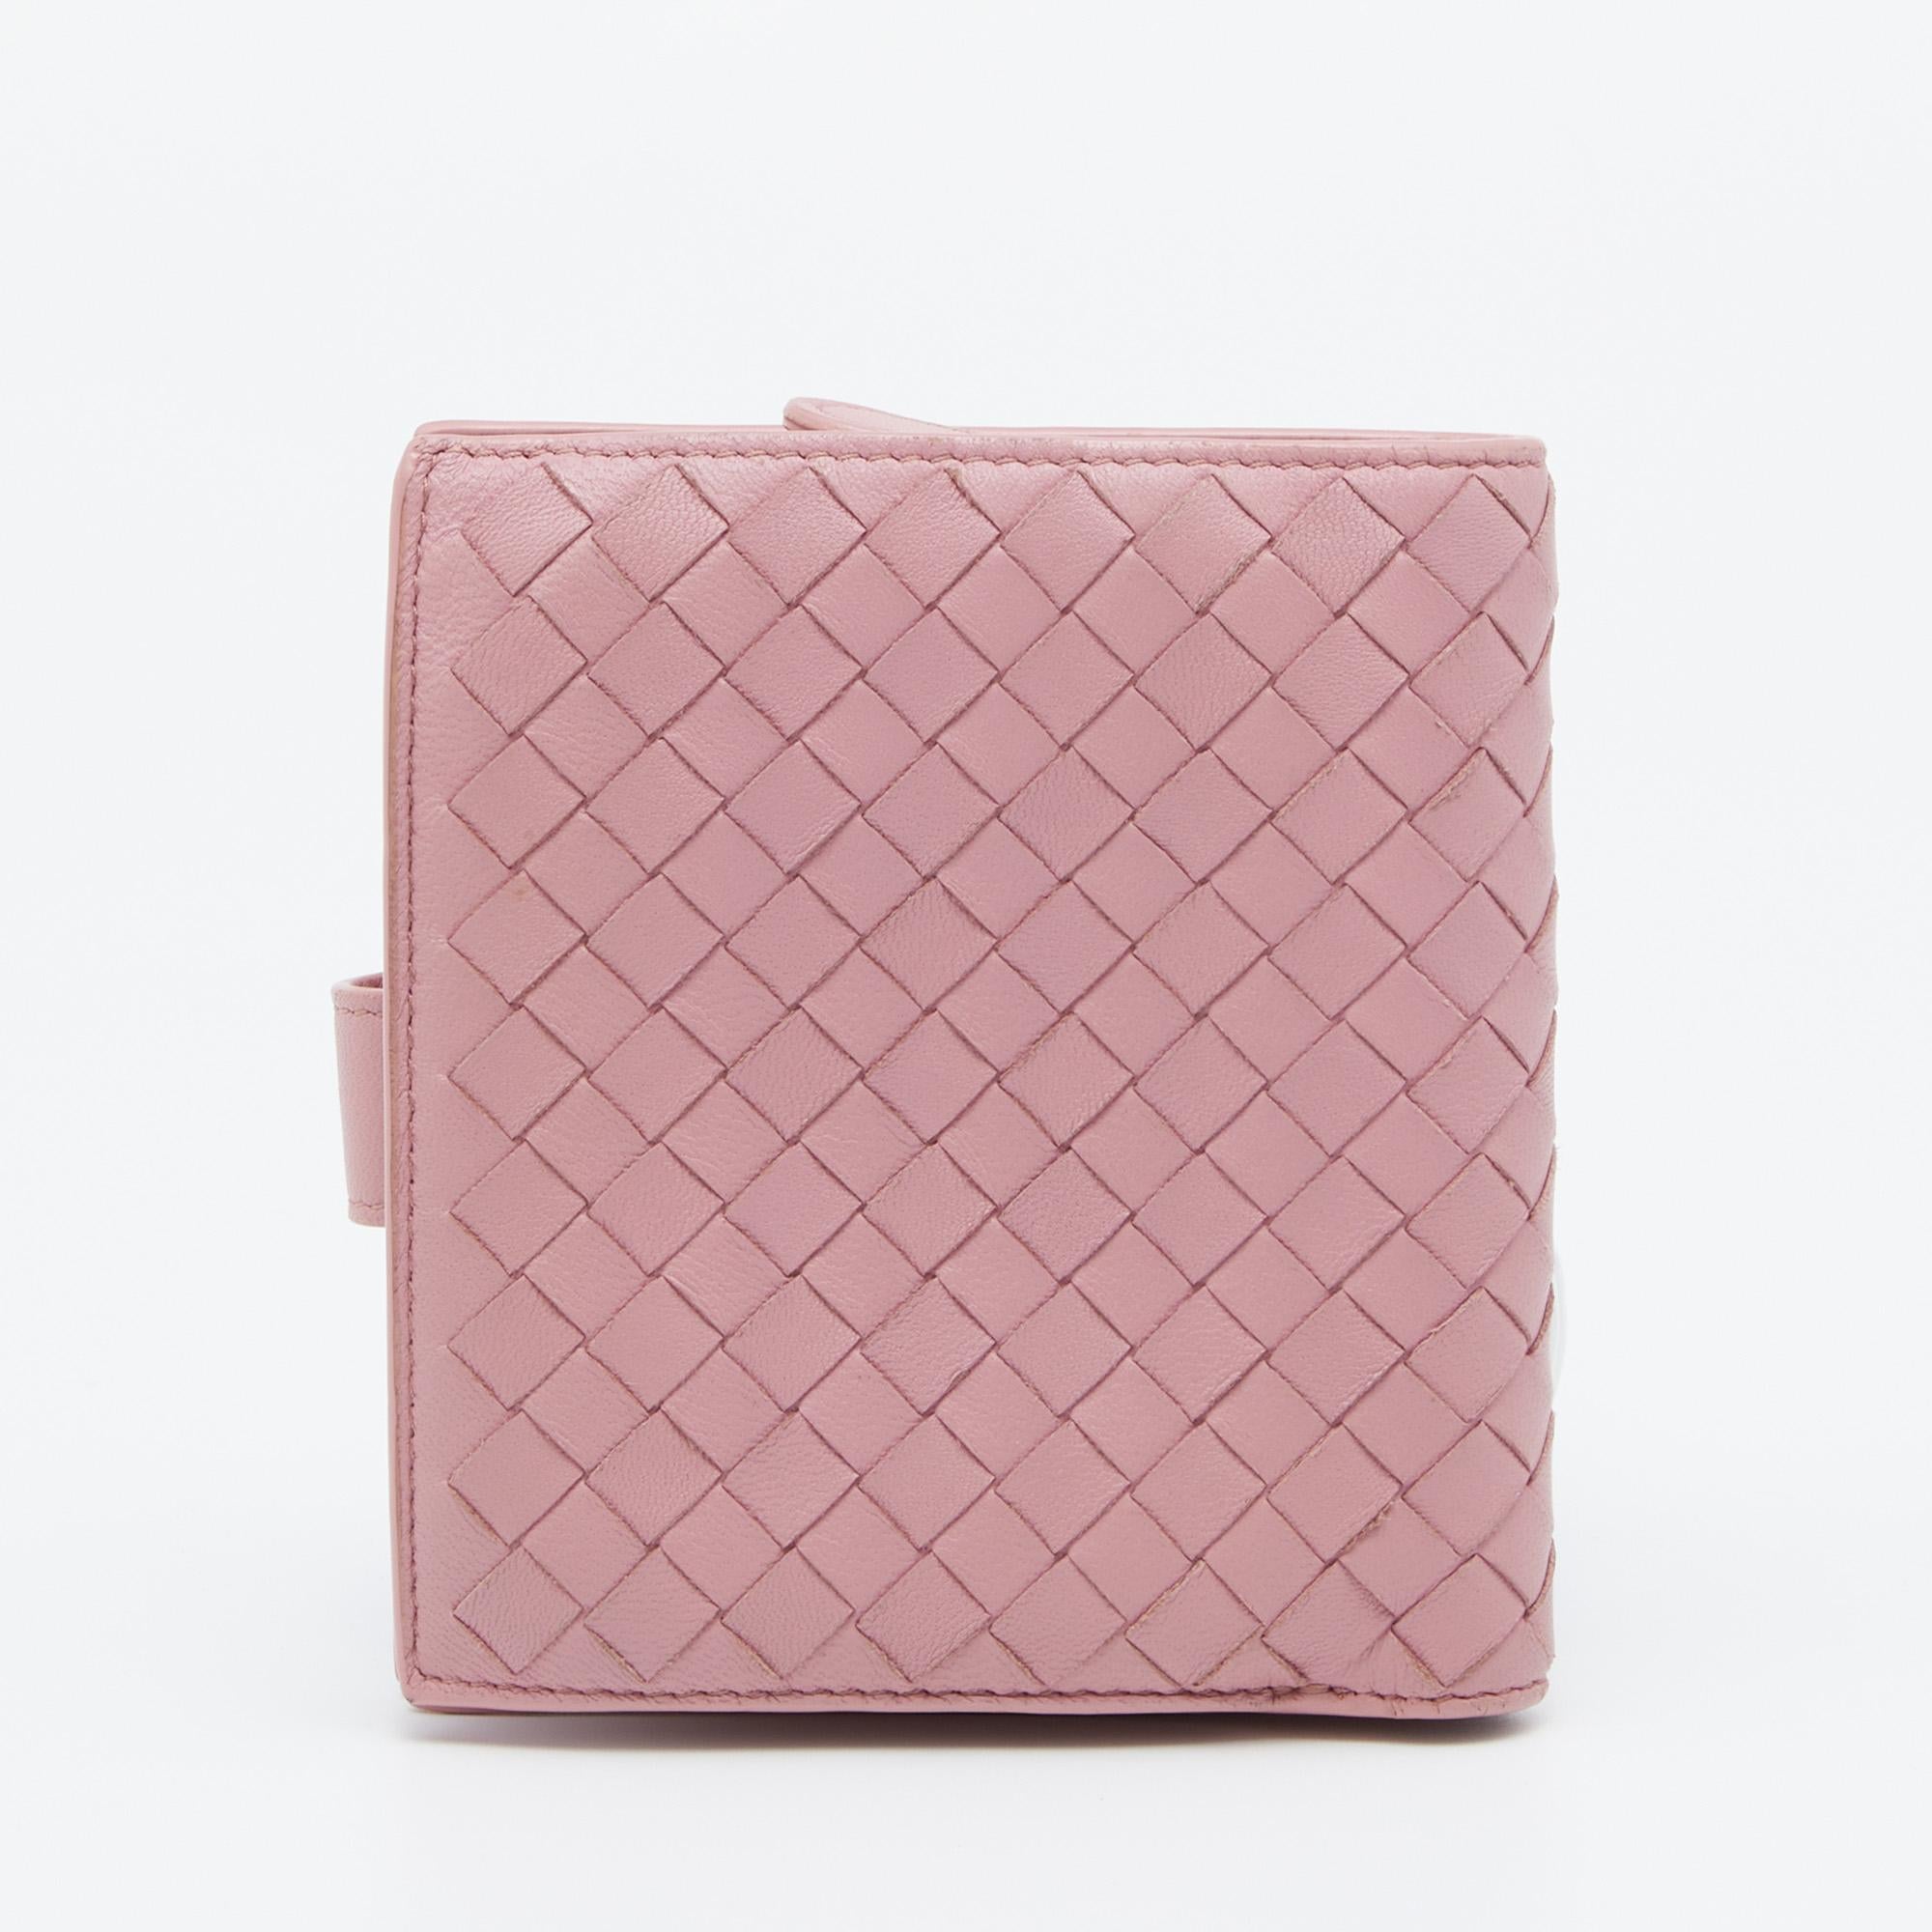 This compact wallet from Bottega Veneta is chic and practical! Flawlessly crafted in beautiful pink Nappa leather, it features the signature hand-woven Intrecciato pattern and snaps closure. The leather interior features one zipped compartment, two